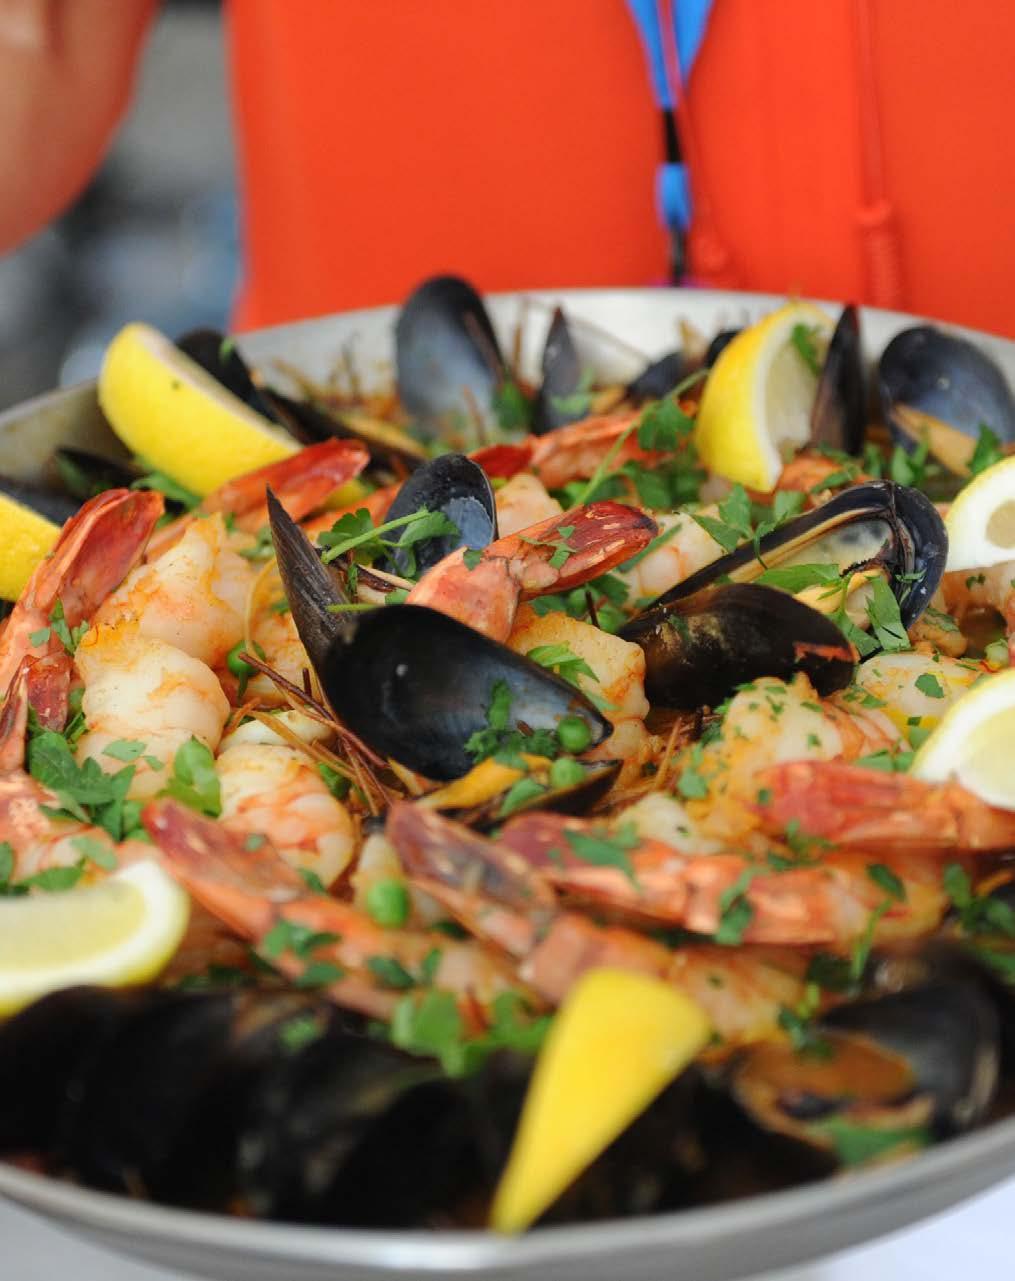 CLAMBAKE HOSTED BY EMERIL LAGASSE AND JORGE RAMOS PART OF THE CRAVE GREATER FORT LAUDERDALE SERIES Date: Thursday, February 22 Time: 7 pm - 10 pm Location: Beachside at the Conrad Fort Lauderdale